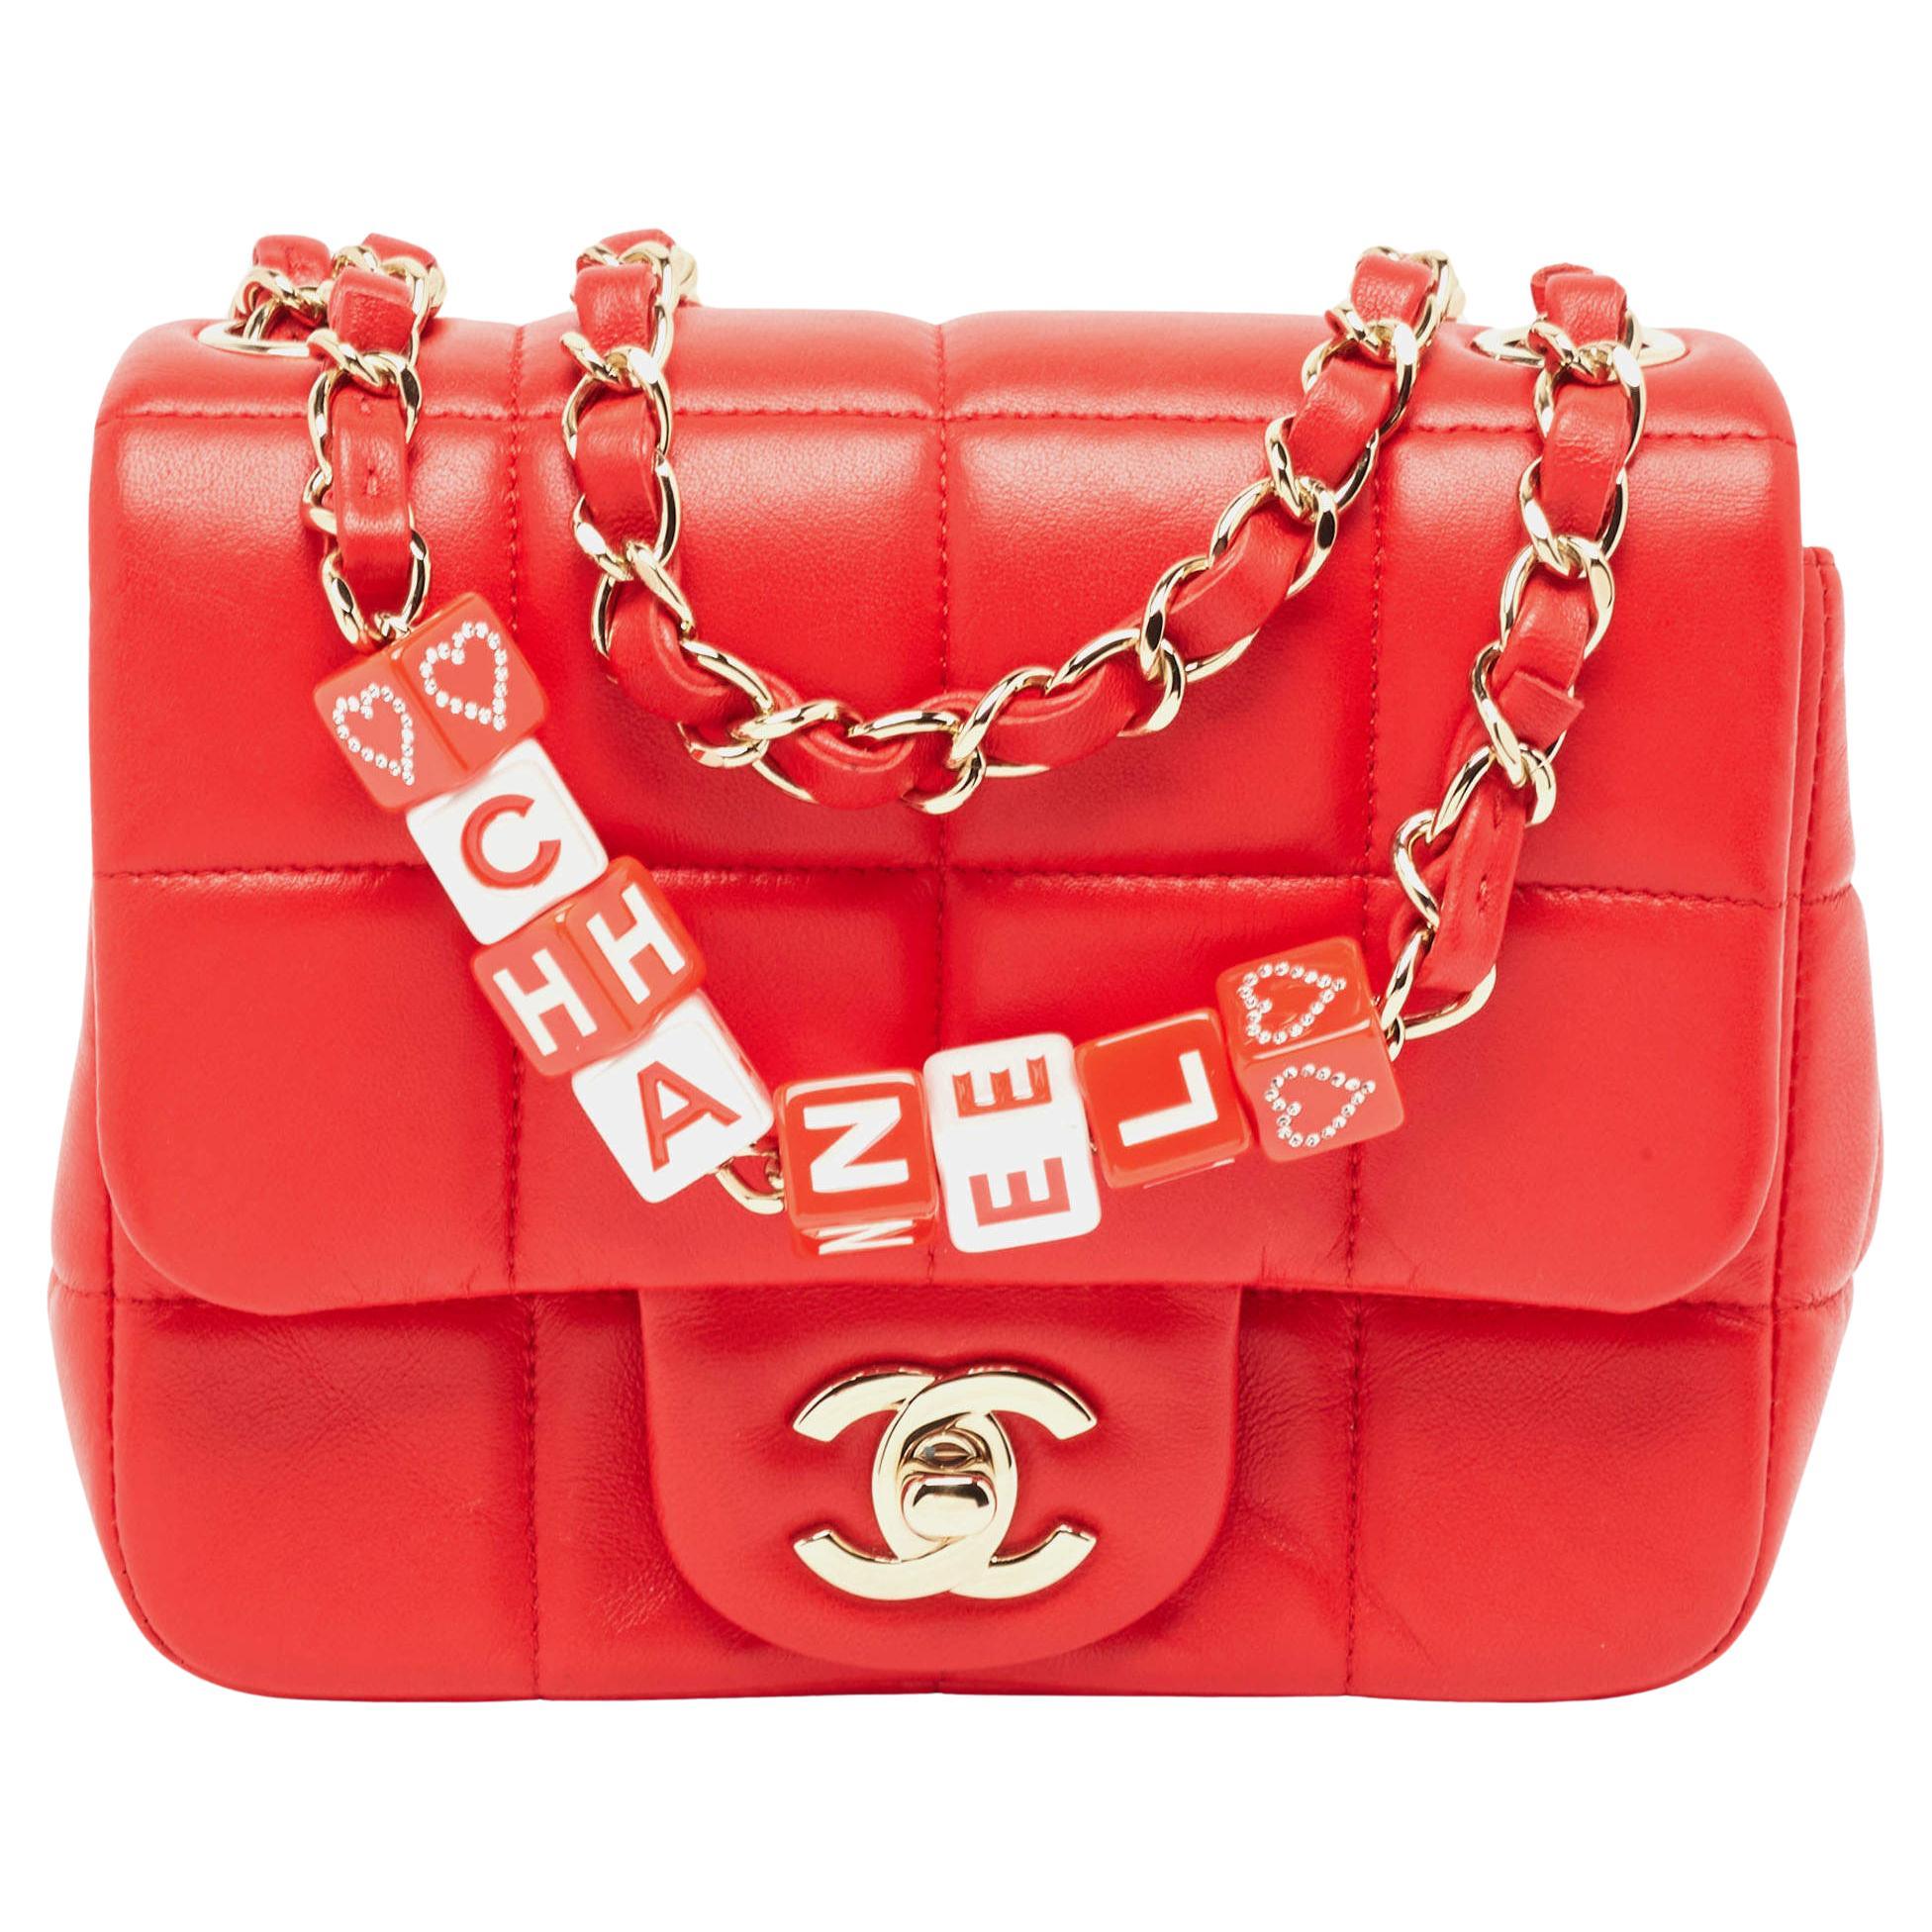 Chanel Red Quilted Leather Mini Monacoco Square Flap Bag For Sale